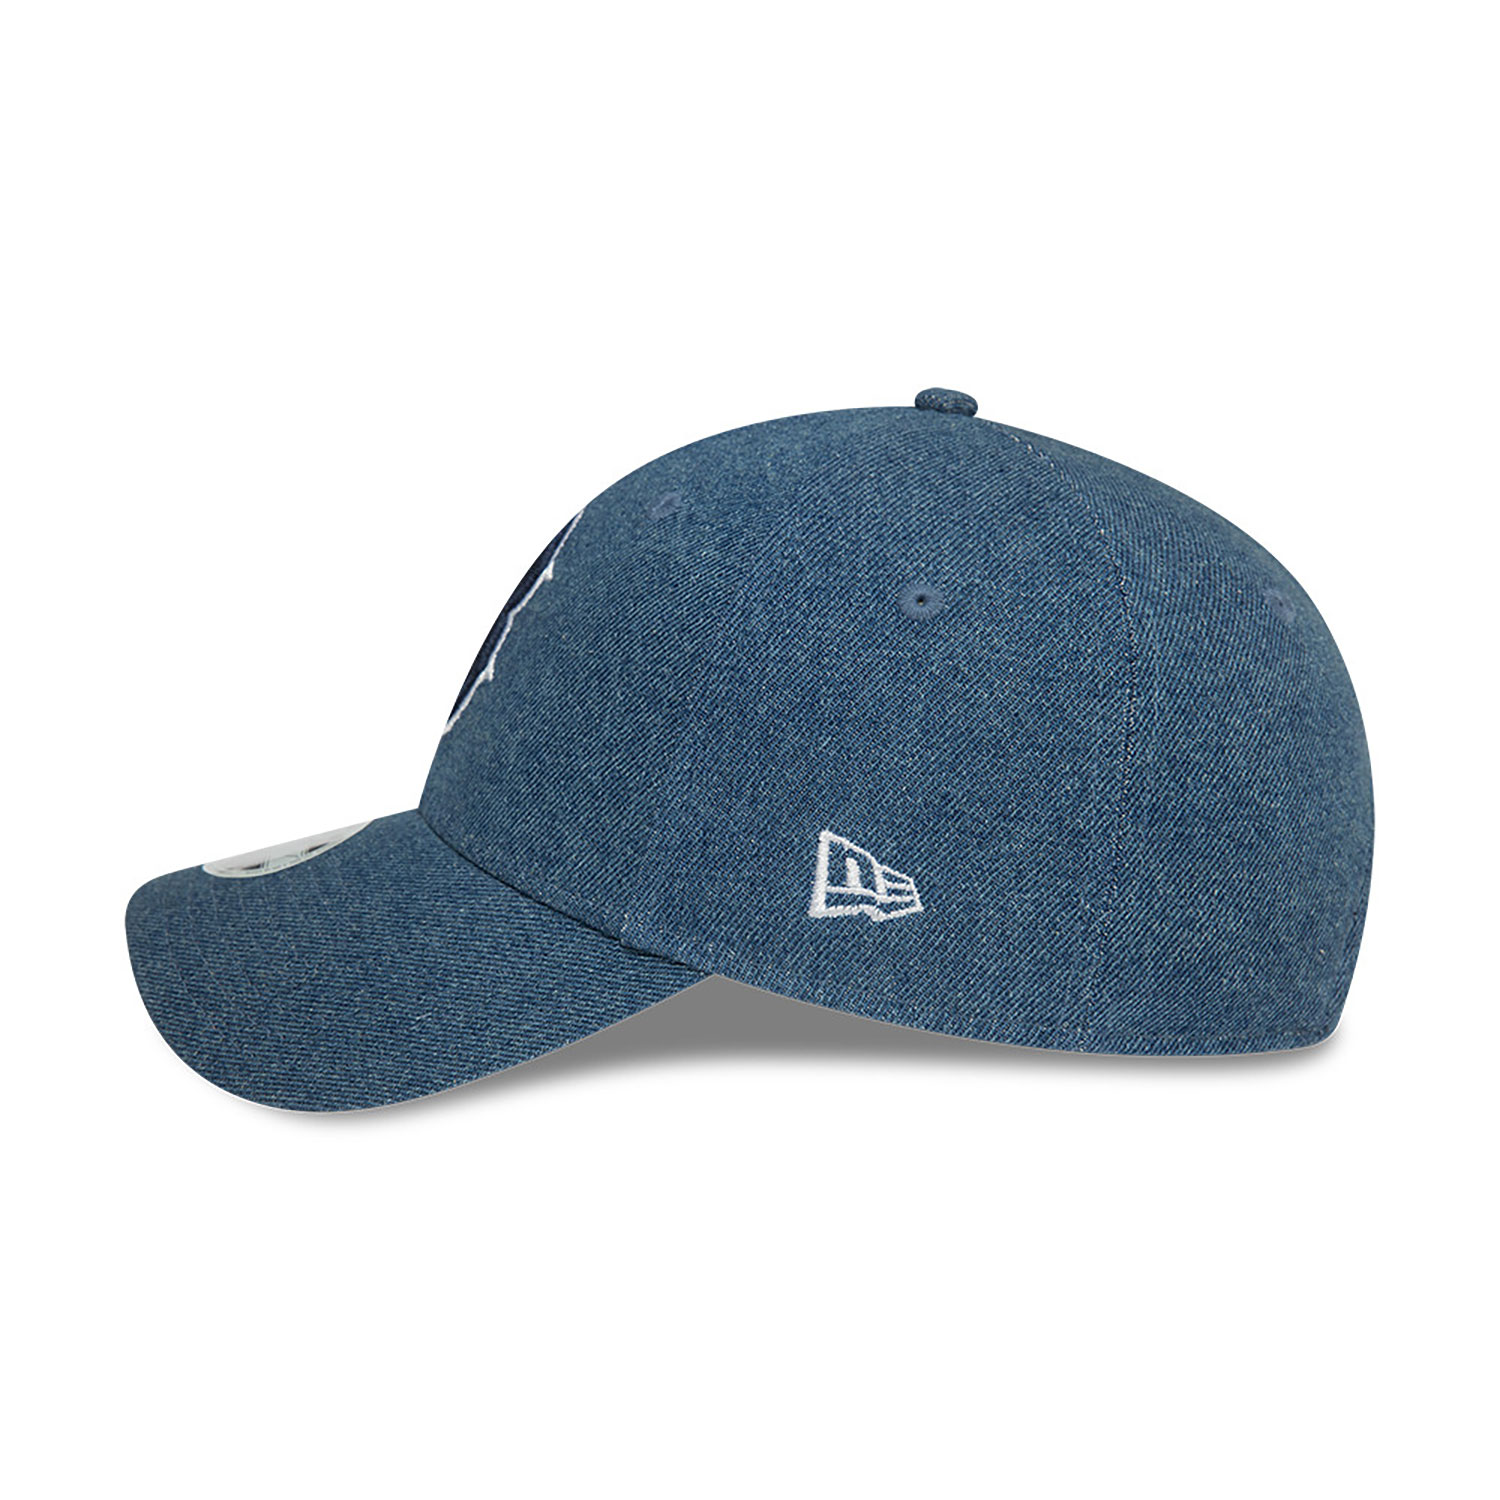 Boston Red Sox Womens Denim Mimosa Blue 9FORTY Adjustable Cap